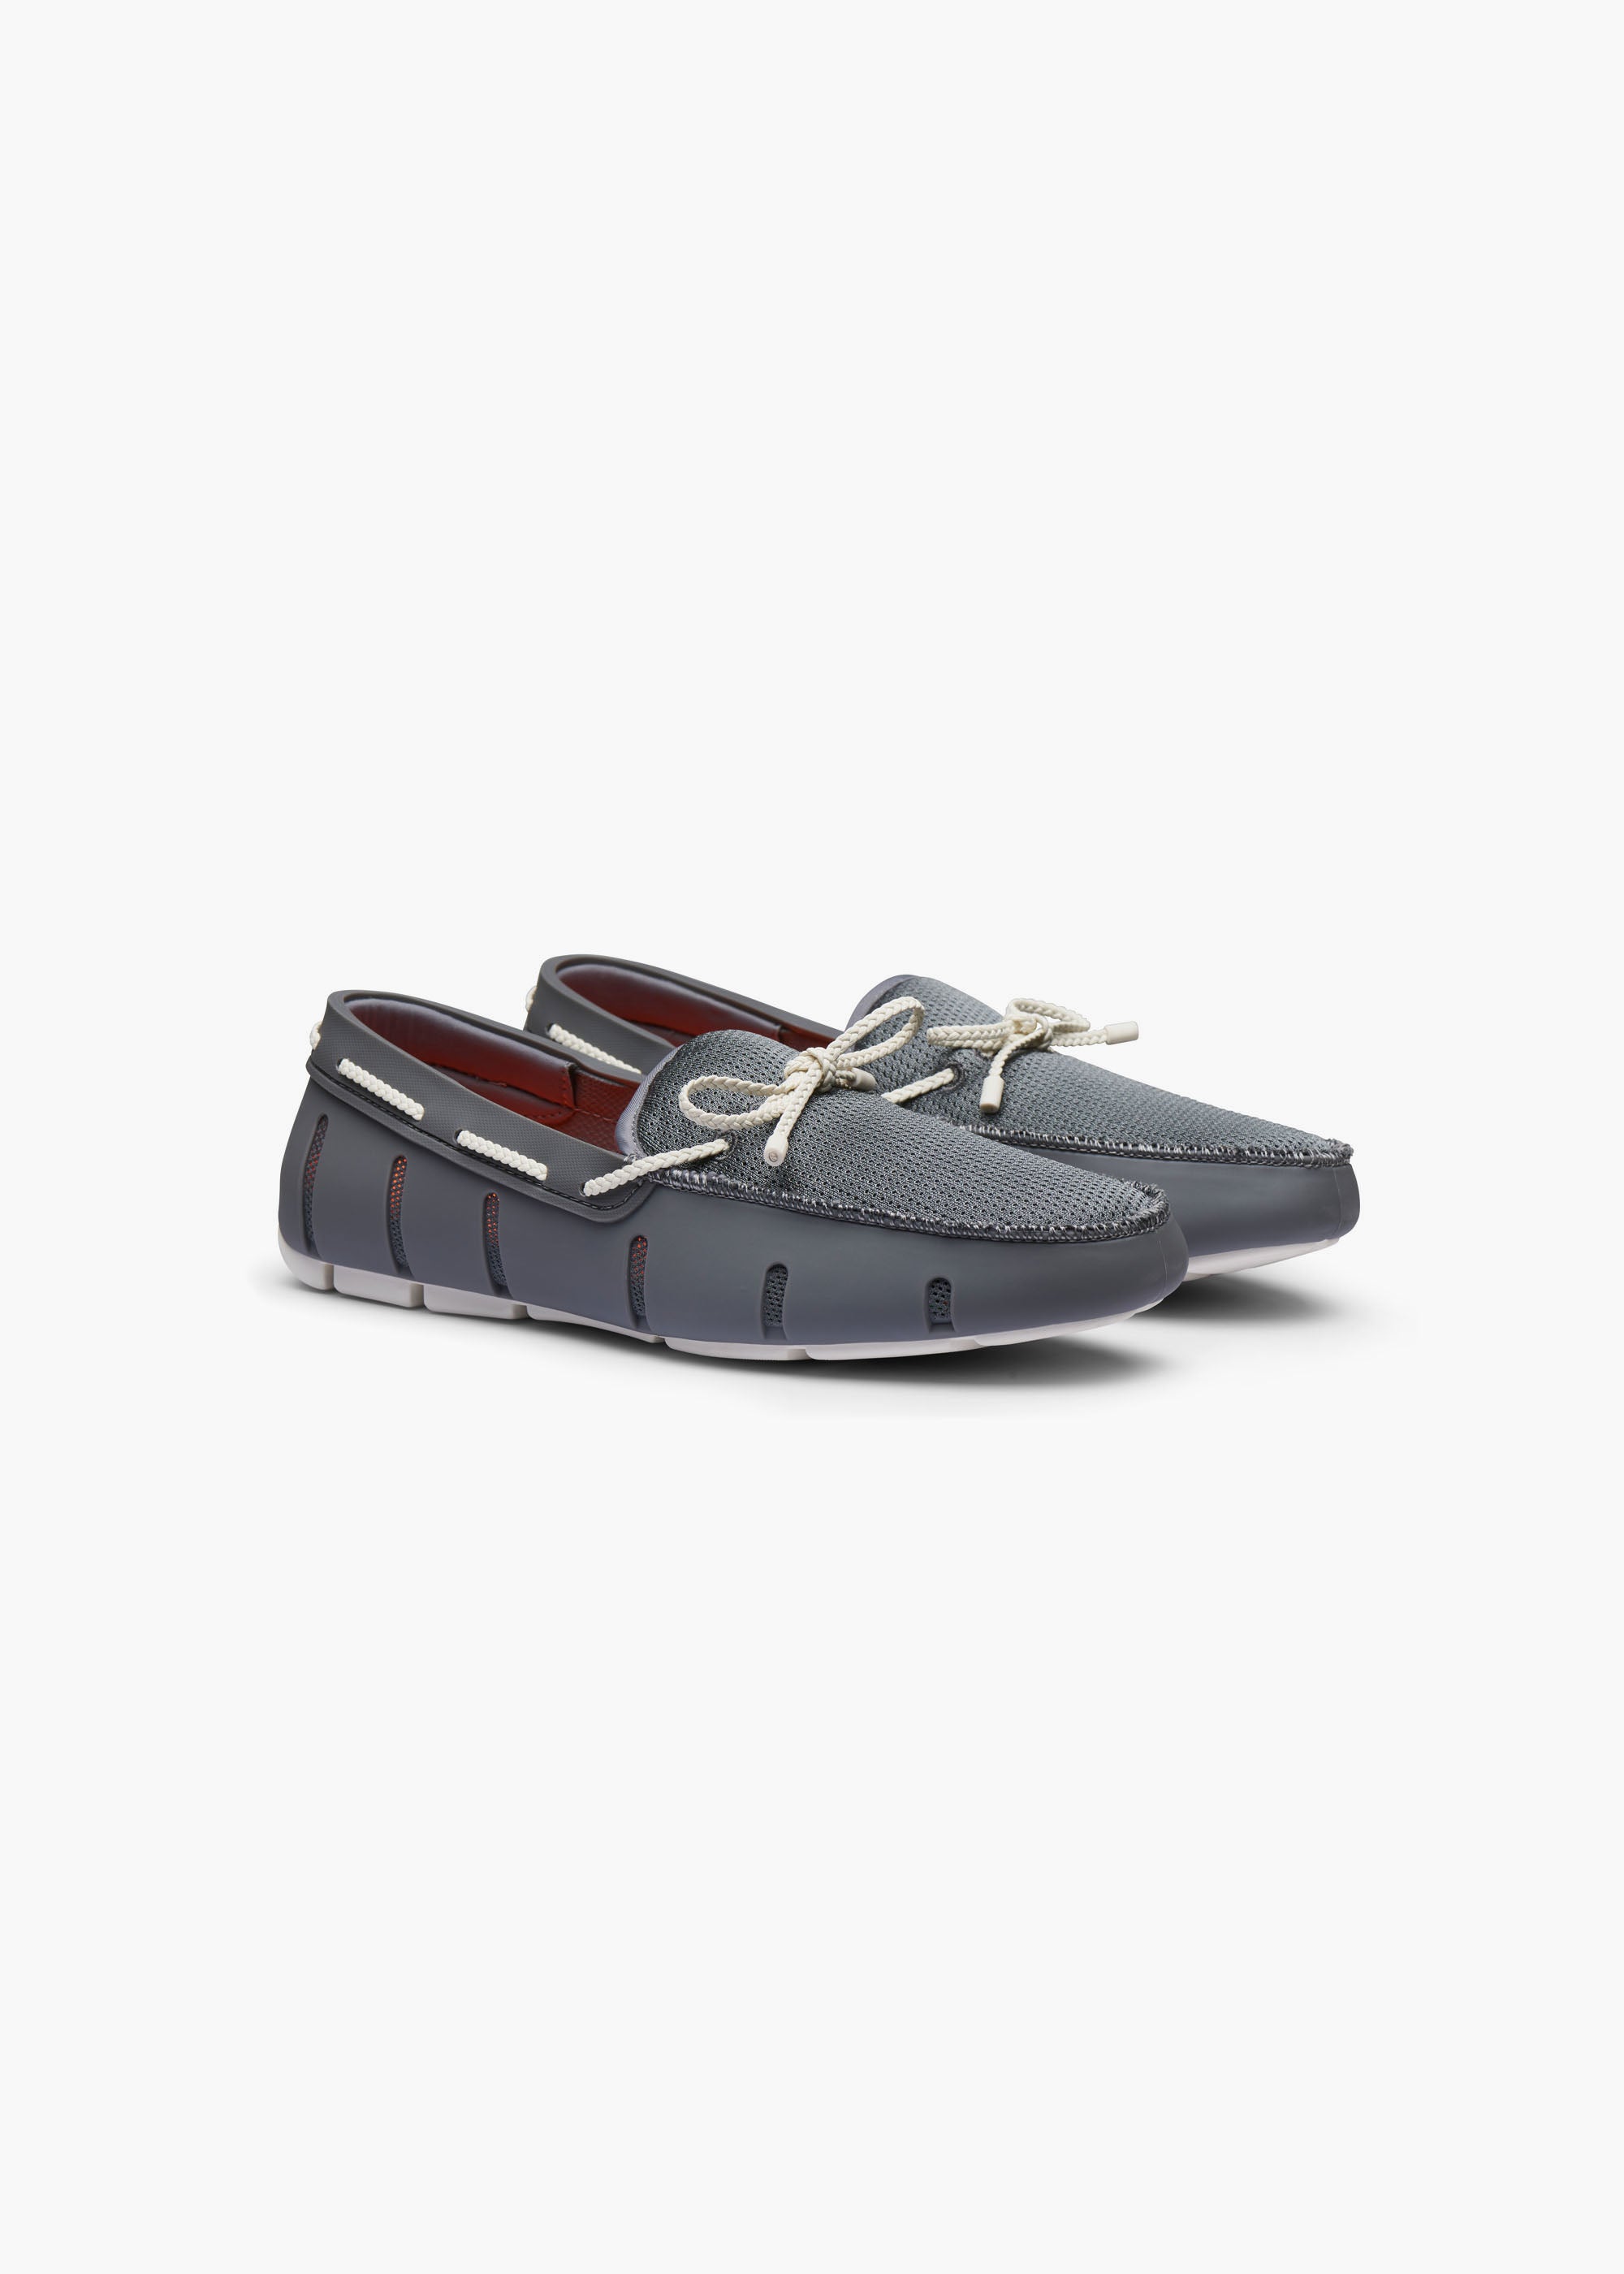 Braided Lace Loafer in Basalt Grey for Mens, SWIMS